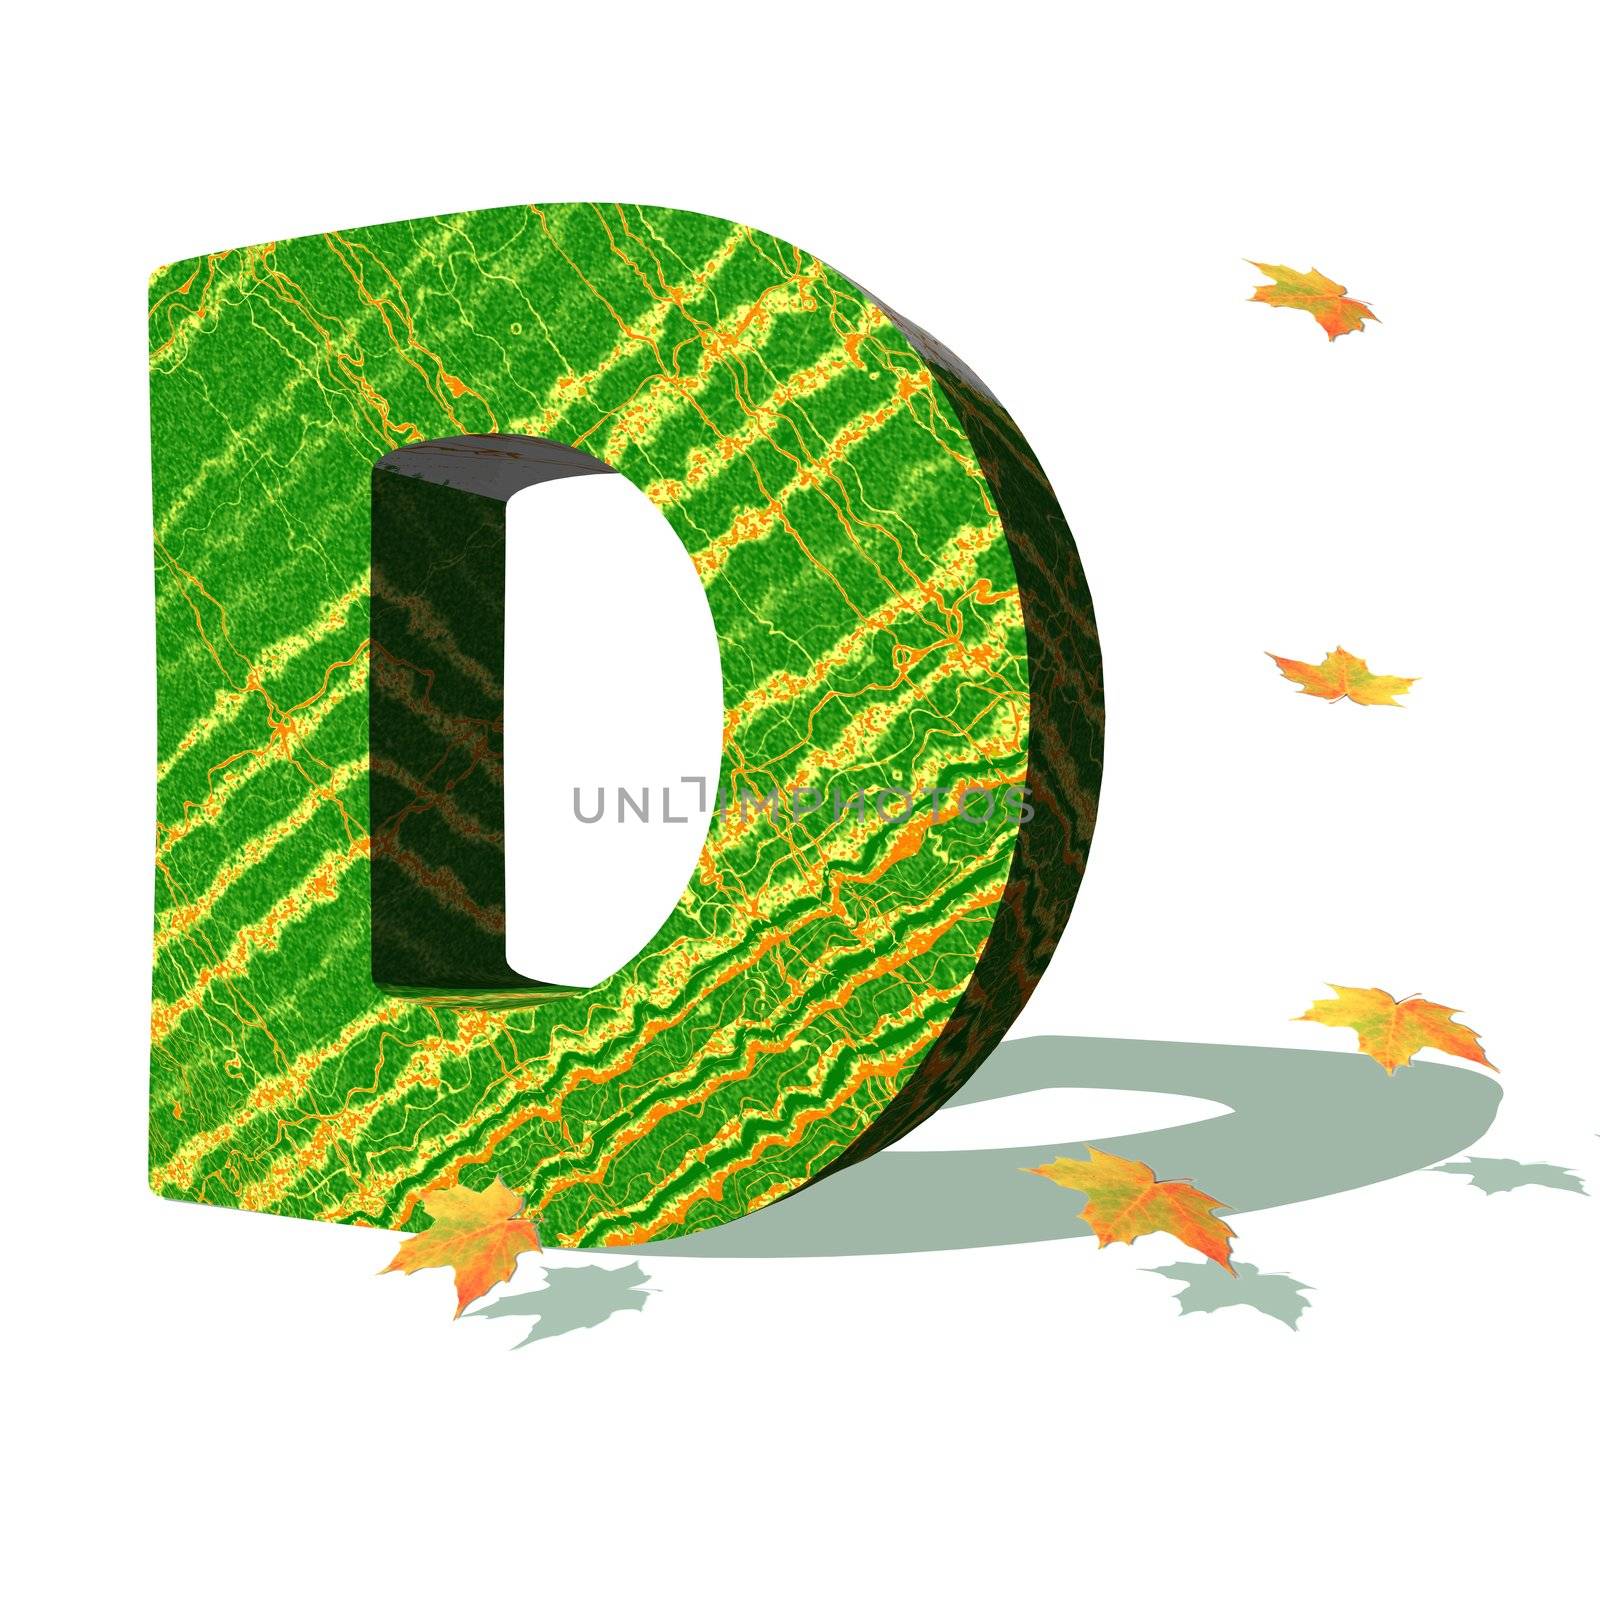 Green ecological D capital letter surrounded by few autumn falling leaves in a white background with shadows